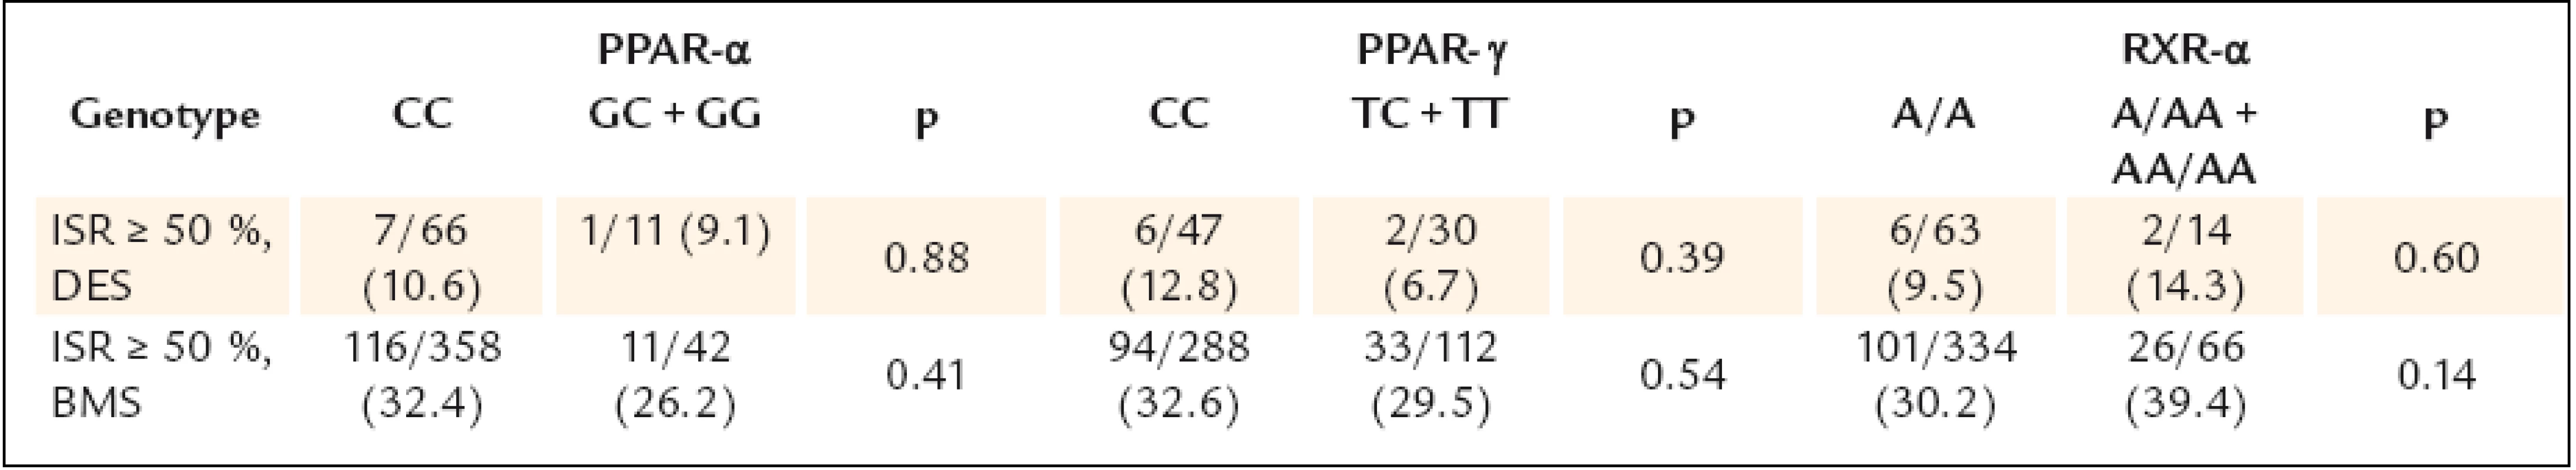 Occurrence of ISR in patients with DES and without DES.